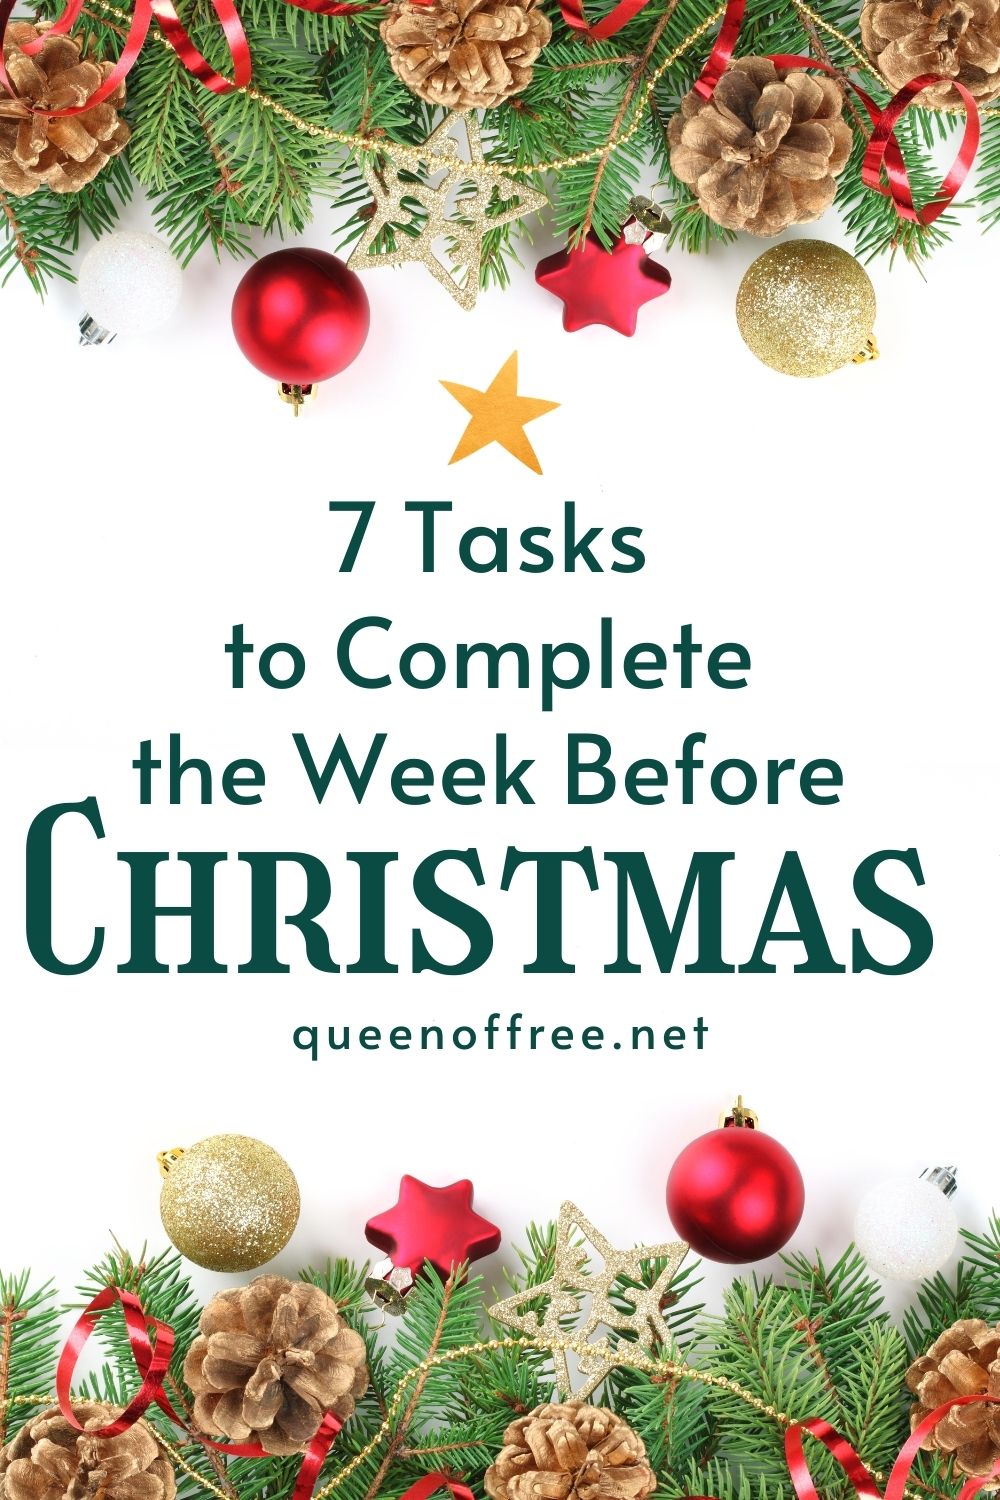 Don't stress out or overspend! 7 tasks to do the week before Christmas keep the happy in your holidays & save time, money, & your sanity!